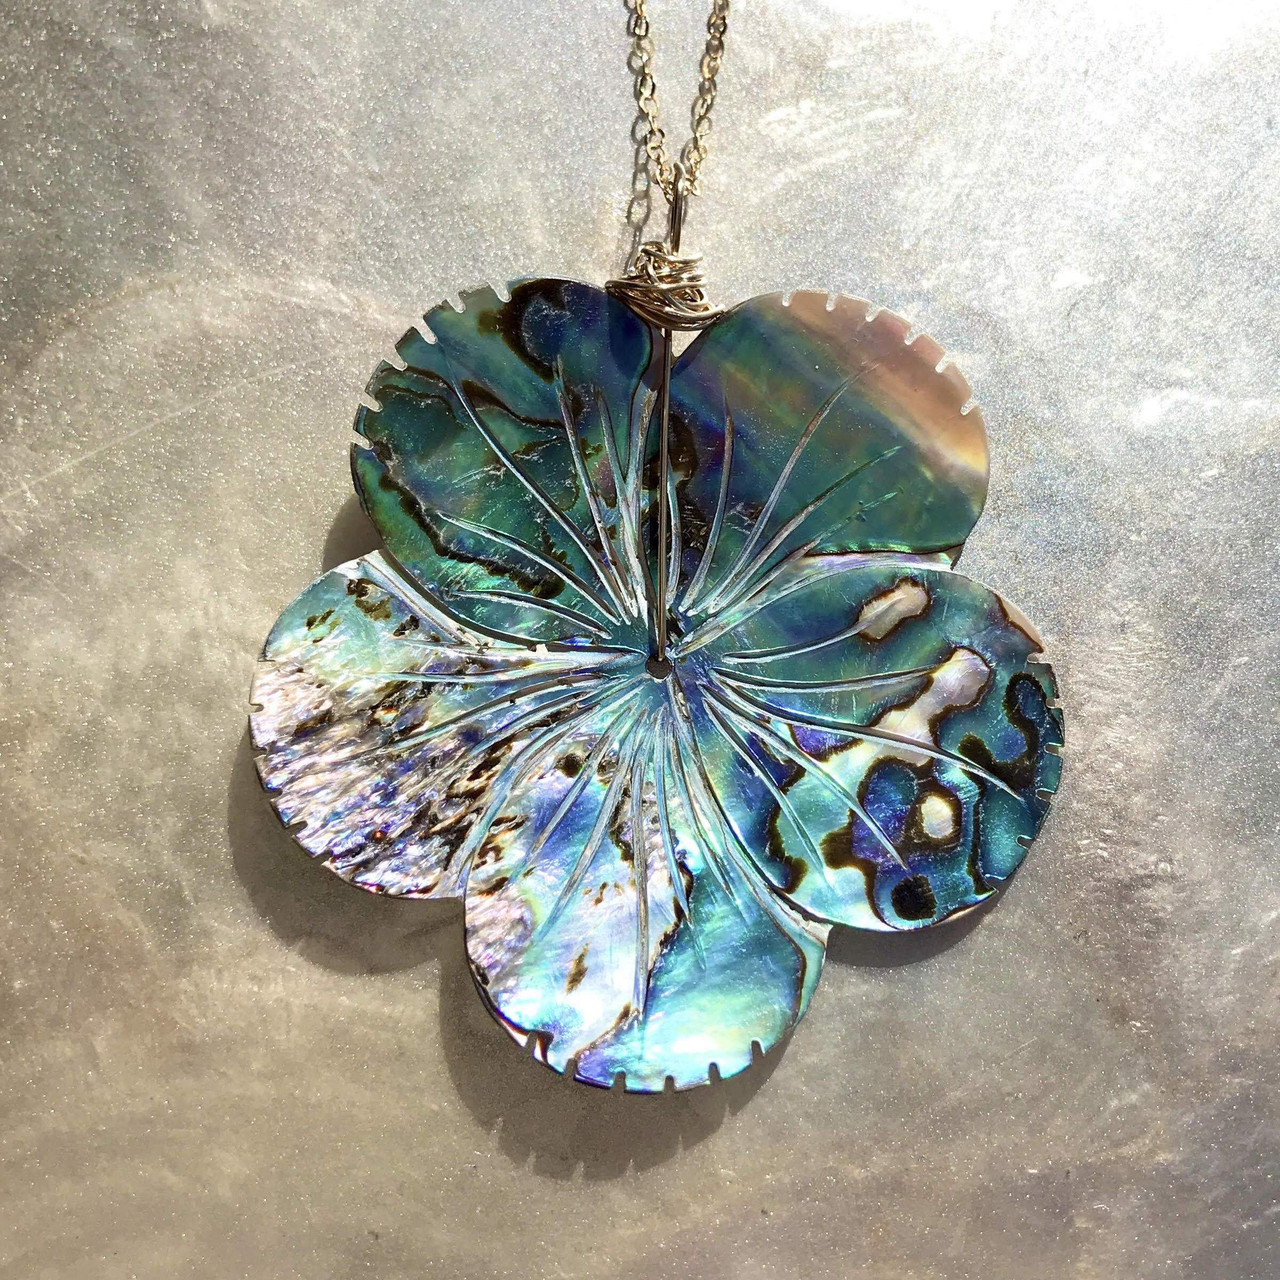 Buy Abalone Shell Necklace / Flower Petal Necklace / Shell Necklace /  Flower Shell Necklace / Rainbow Shell Necklace Online in India - Etsy